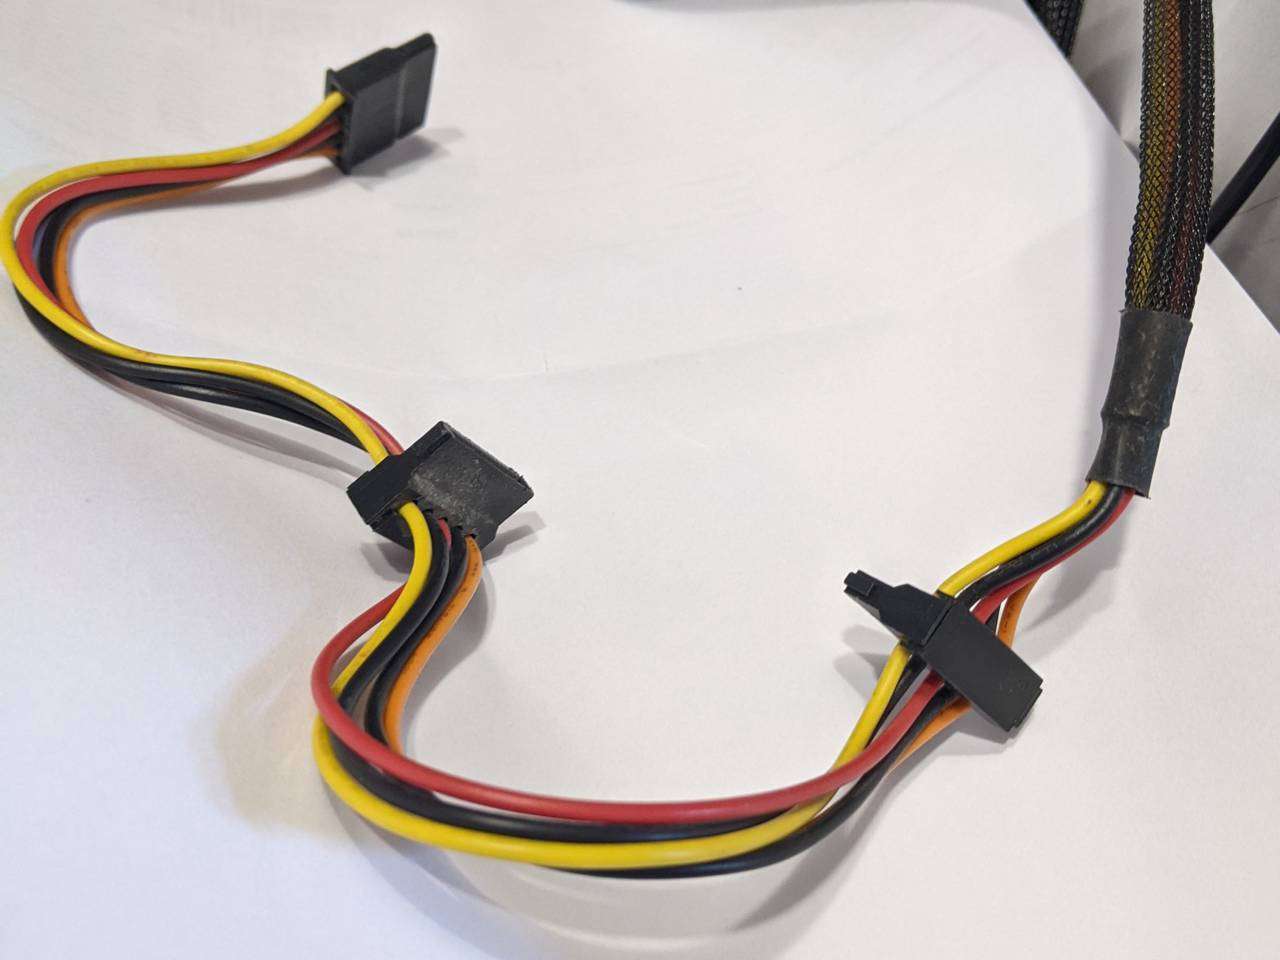 SATA power cable, stock sleeving